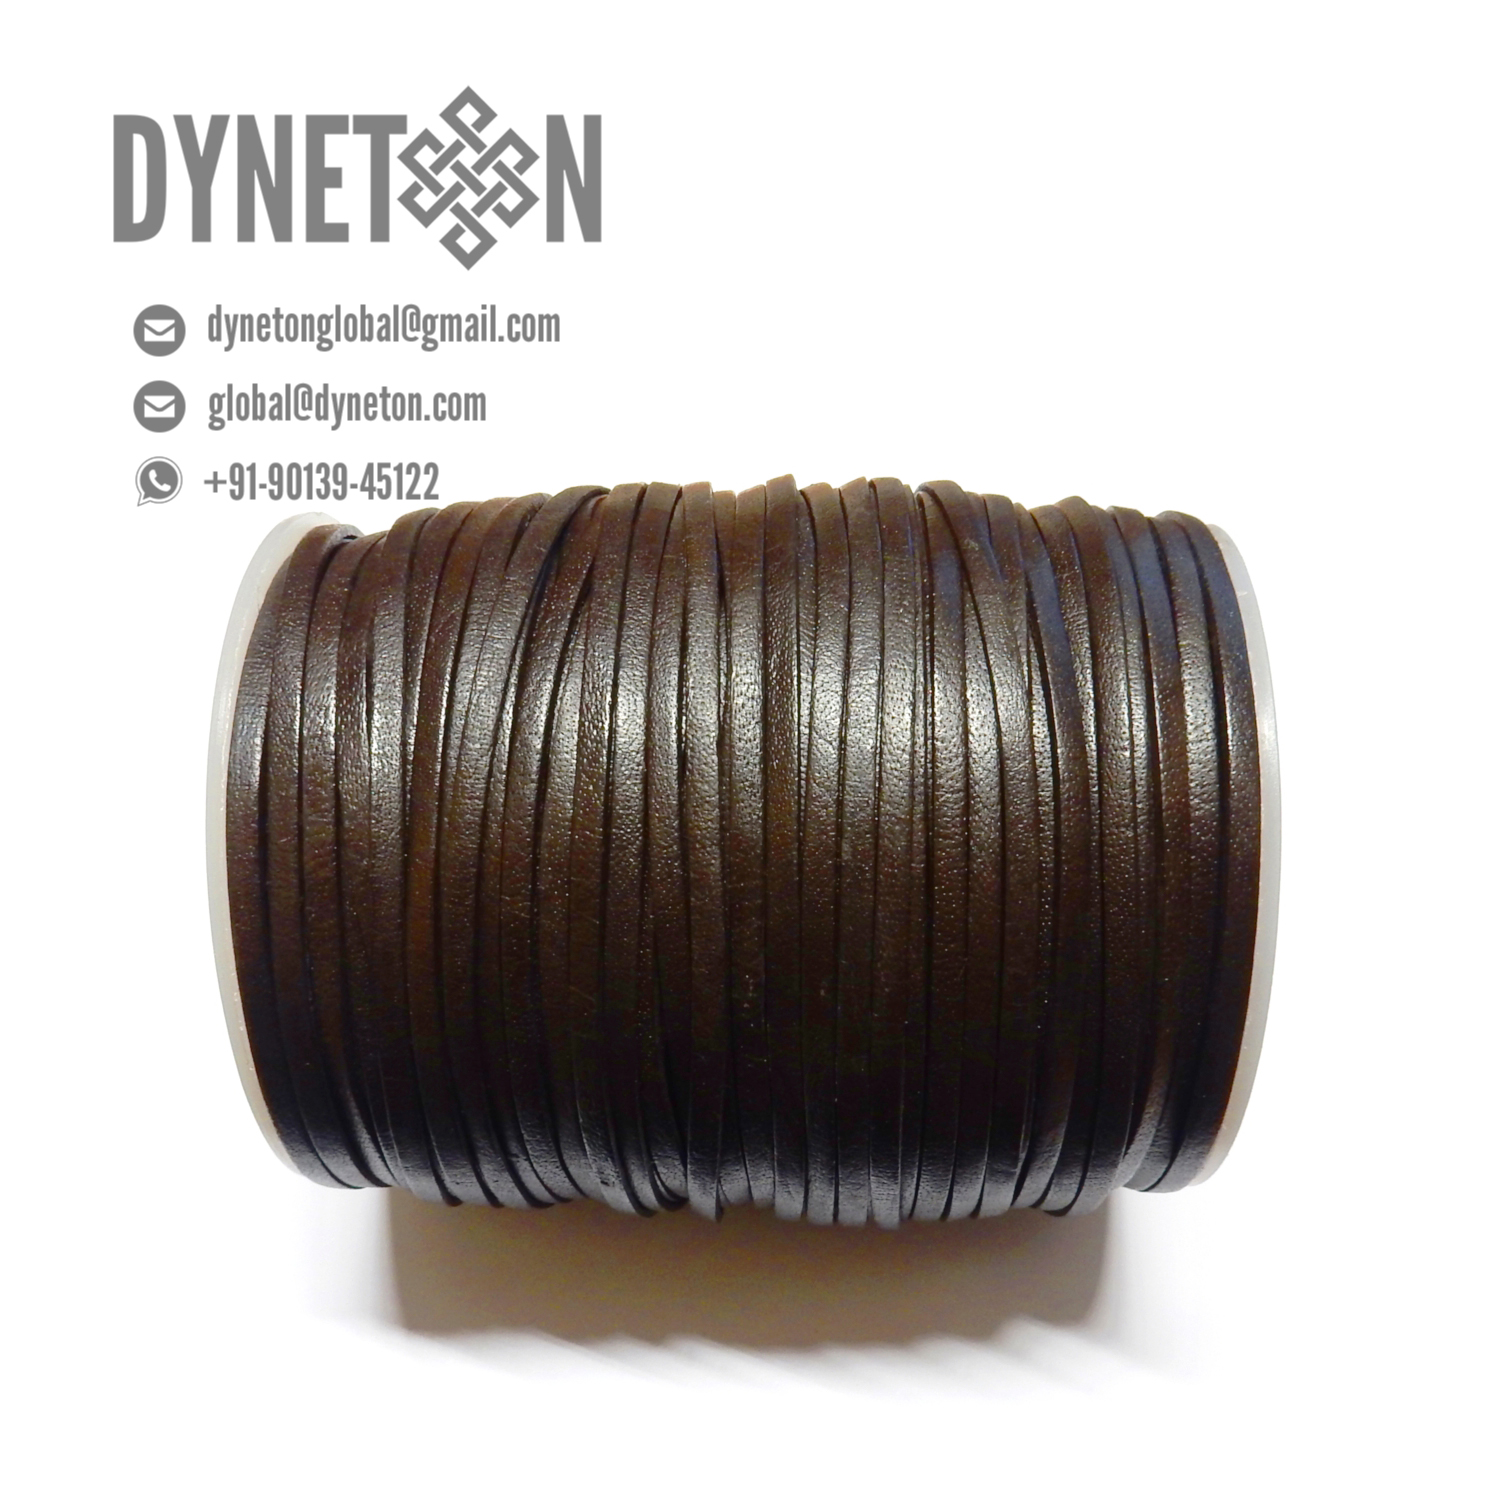 5mm Flat Leather Cord - DYNETON / Flat Leather Cords 5 mm